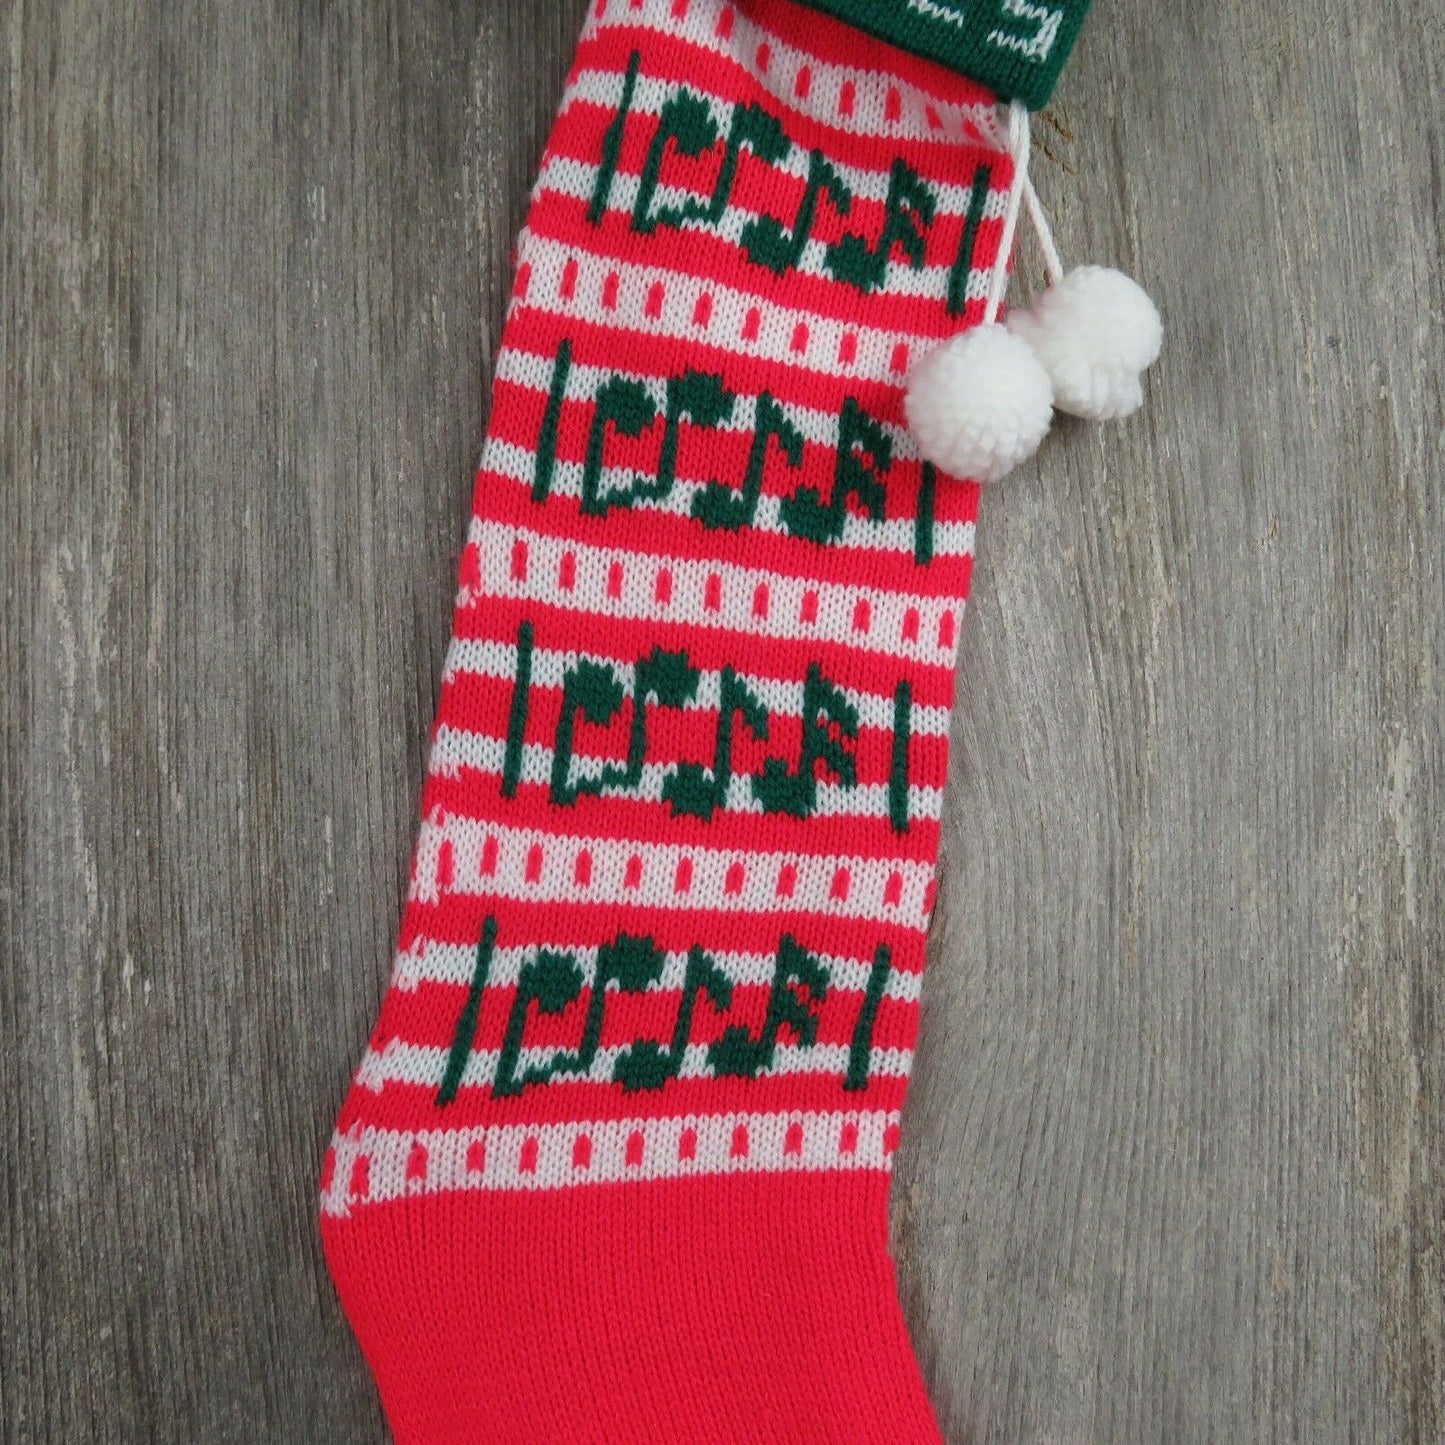 Vintage Jingle Bells Stocking Striped Christmas Knitted Knit Green Red White - At Grandma's Table